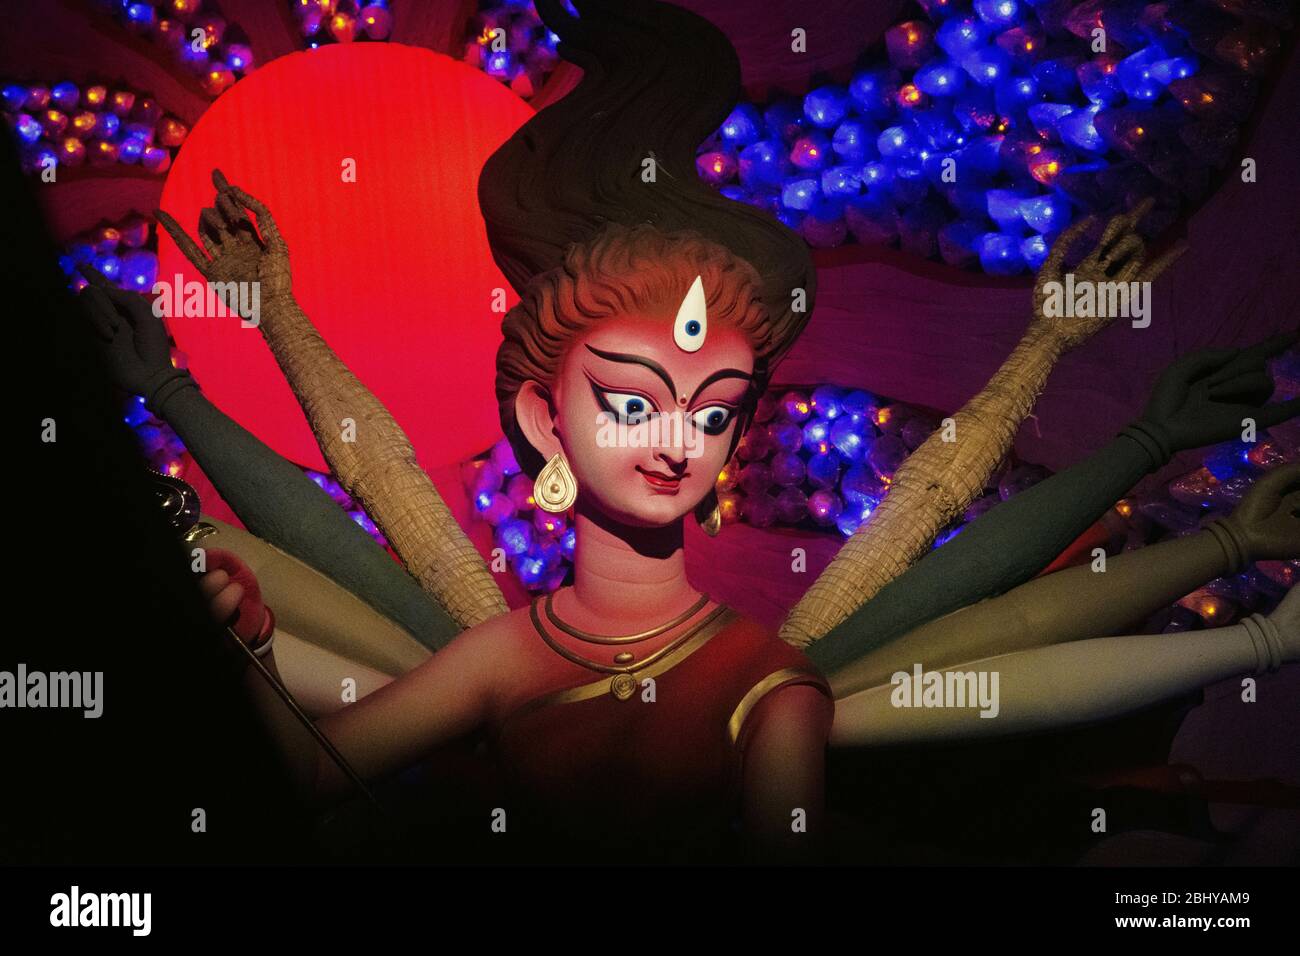 Durga In Several Theme In Several Pandals Stock Photo